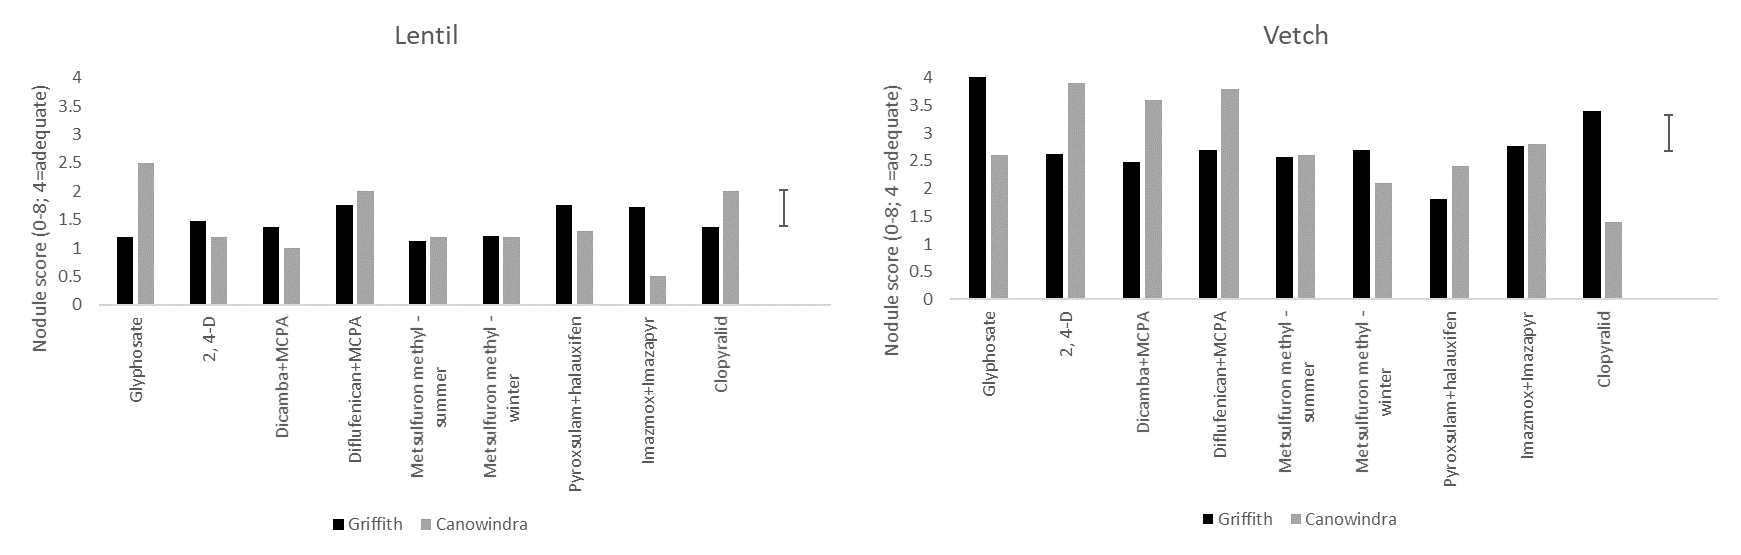 These two column graphs show the effect of a range of herbicides applied in 2019 to the nodulation score (based on the system of Yates et al. 2016) of lentil and vetch sown in 2020 at Griffith and Canowindra. (Note: while the nodulation scoring system used covers the range 0-8, a score of 4 is considered adequate. Fixing nitrogen is an energy expensive process and therefore very high scores are not frequently encountered in the field.) 